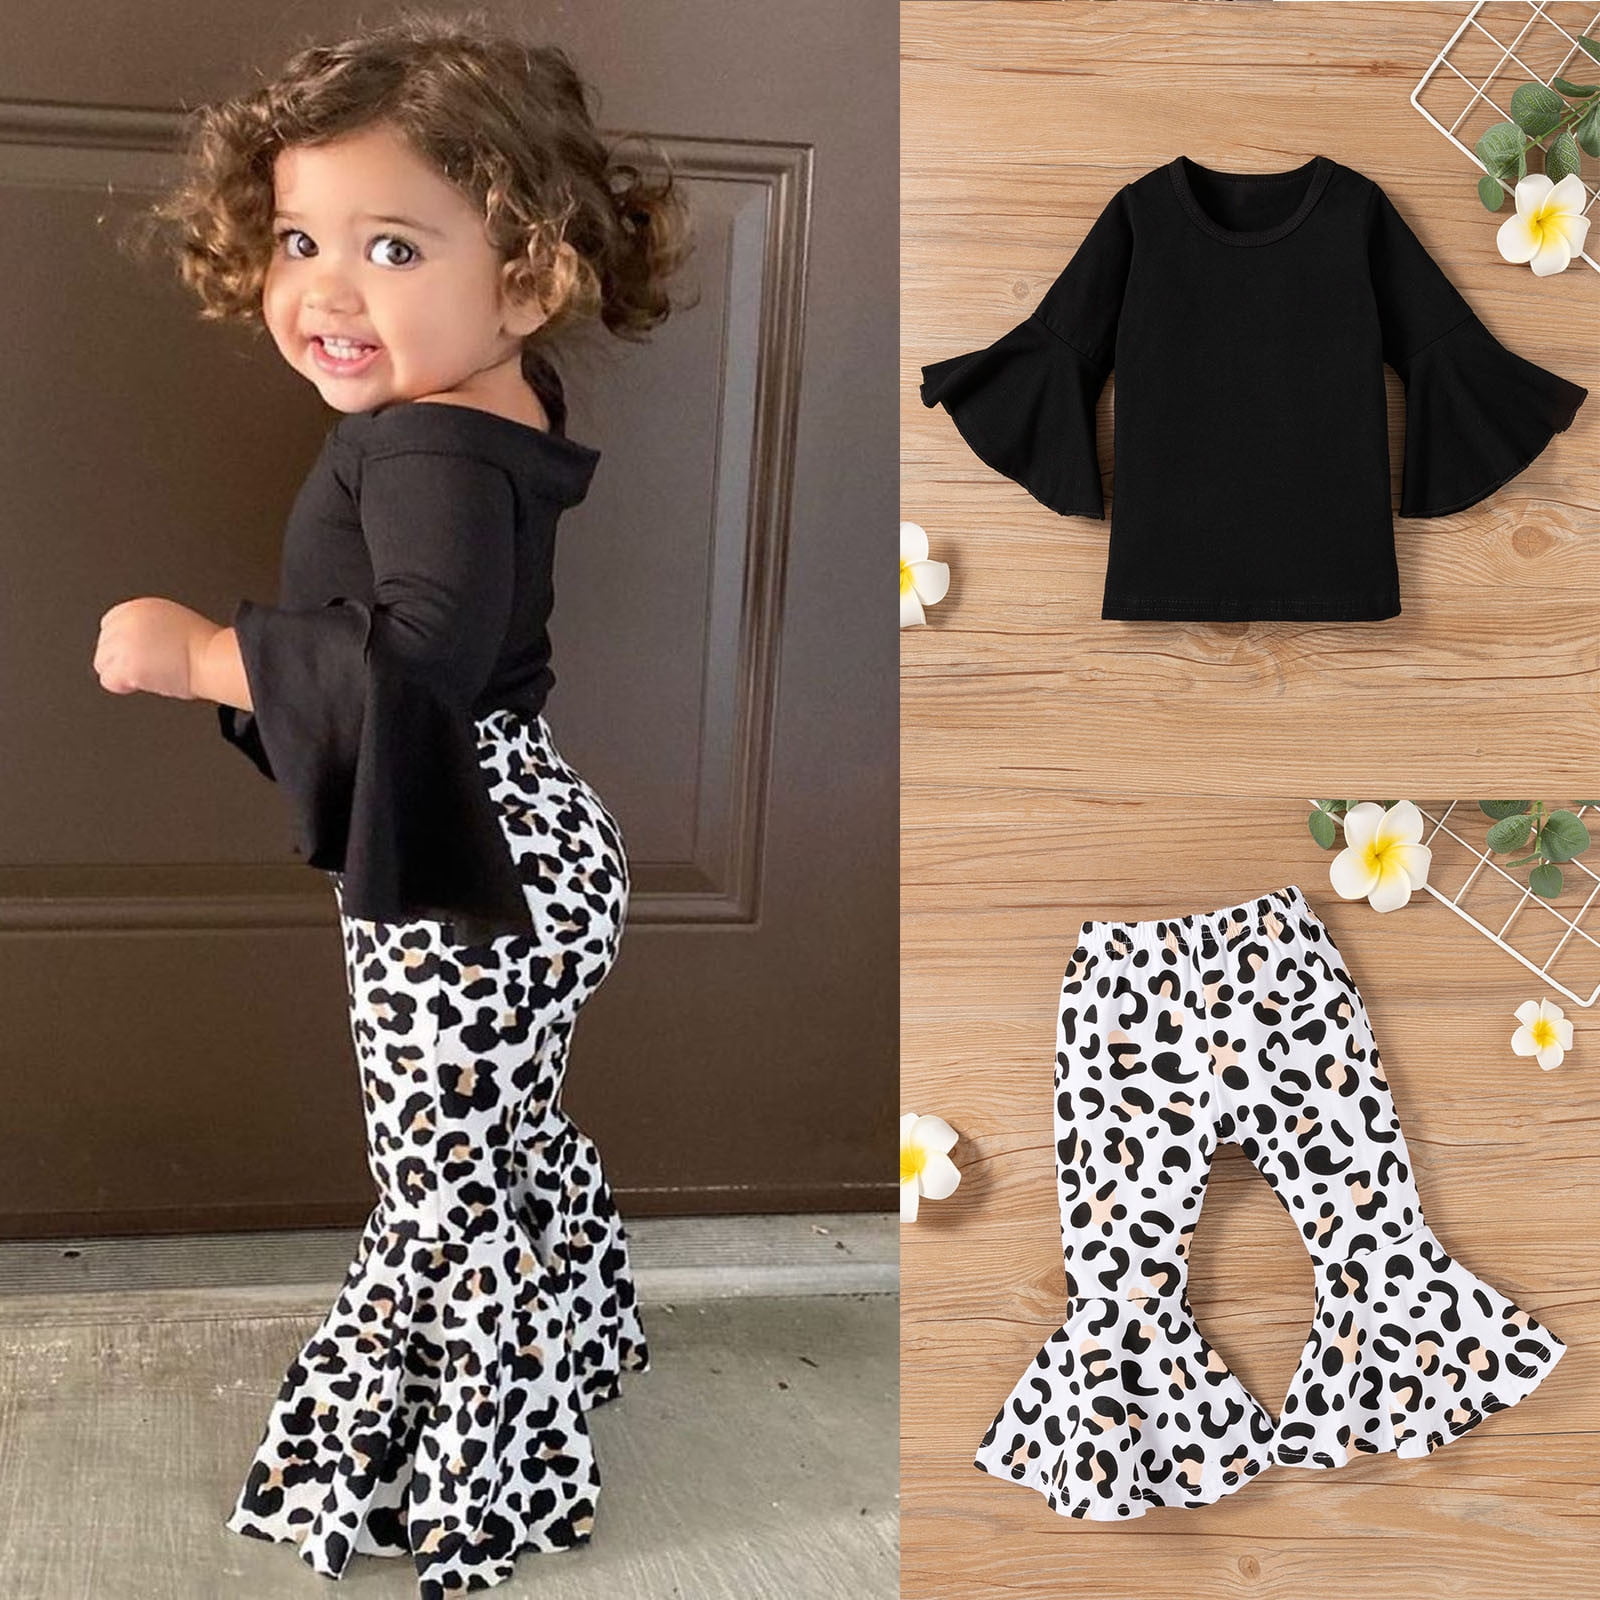 XMMSWDLA Baby Outerwear Toddler Baby Girl Fashion Cute Trumpet Flared Pants  Suit Long Sleeve Leopard Pattern Ruffles